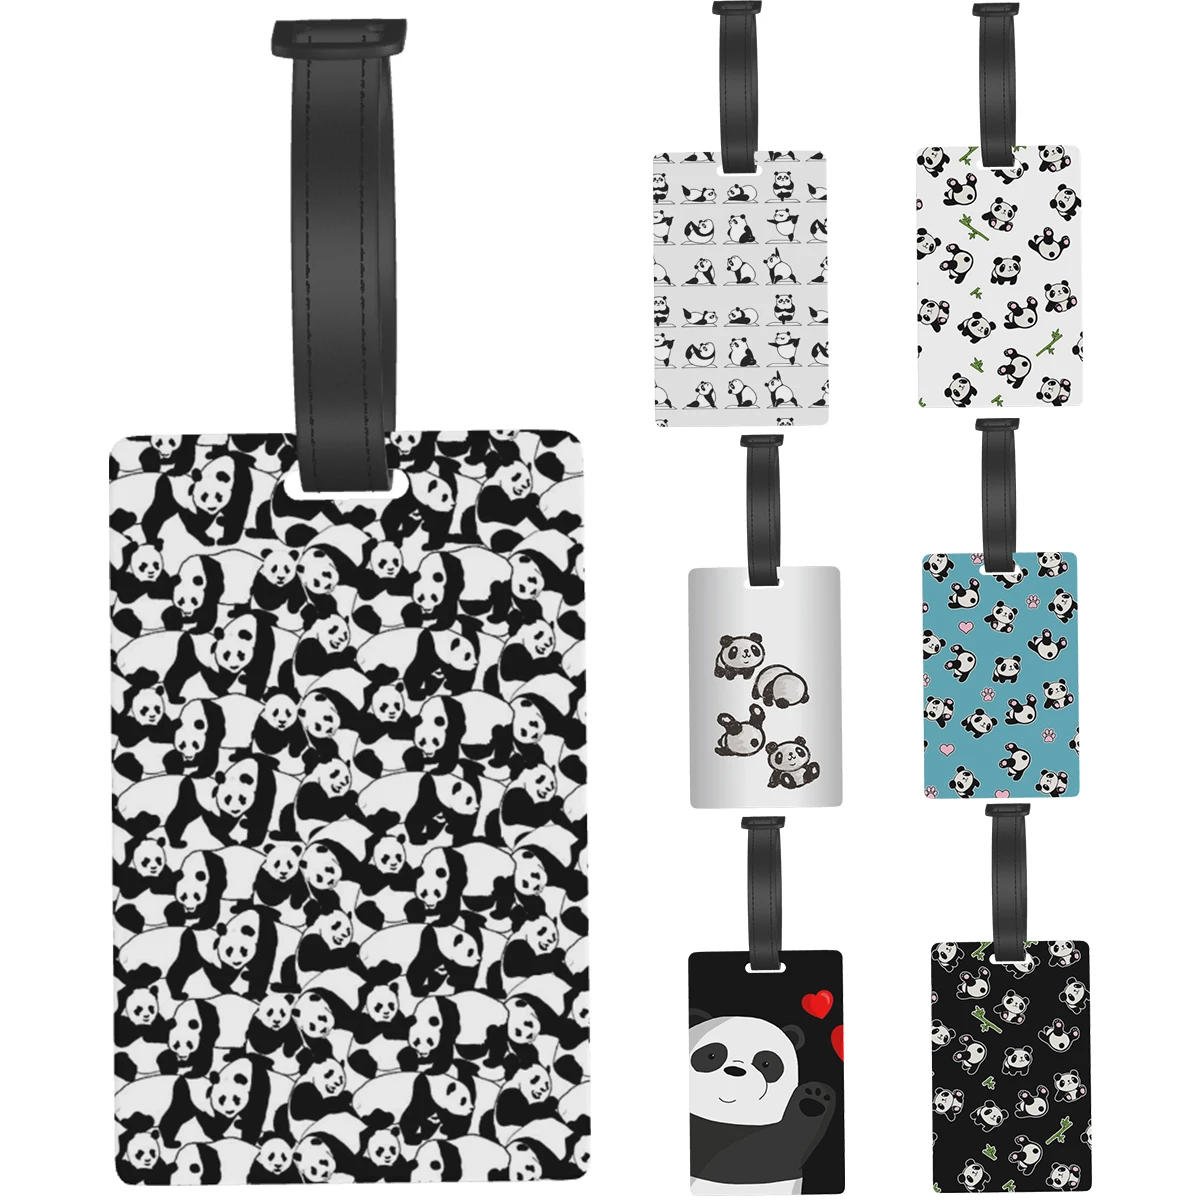 

Panda Cute Animal Luggage Tags Suitcase Accessories Travel Fashion Baggage Boarding Tag Portable Label Holder ID Name Address